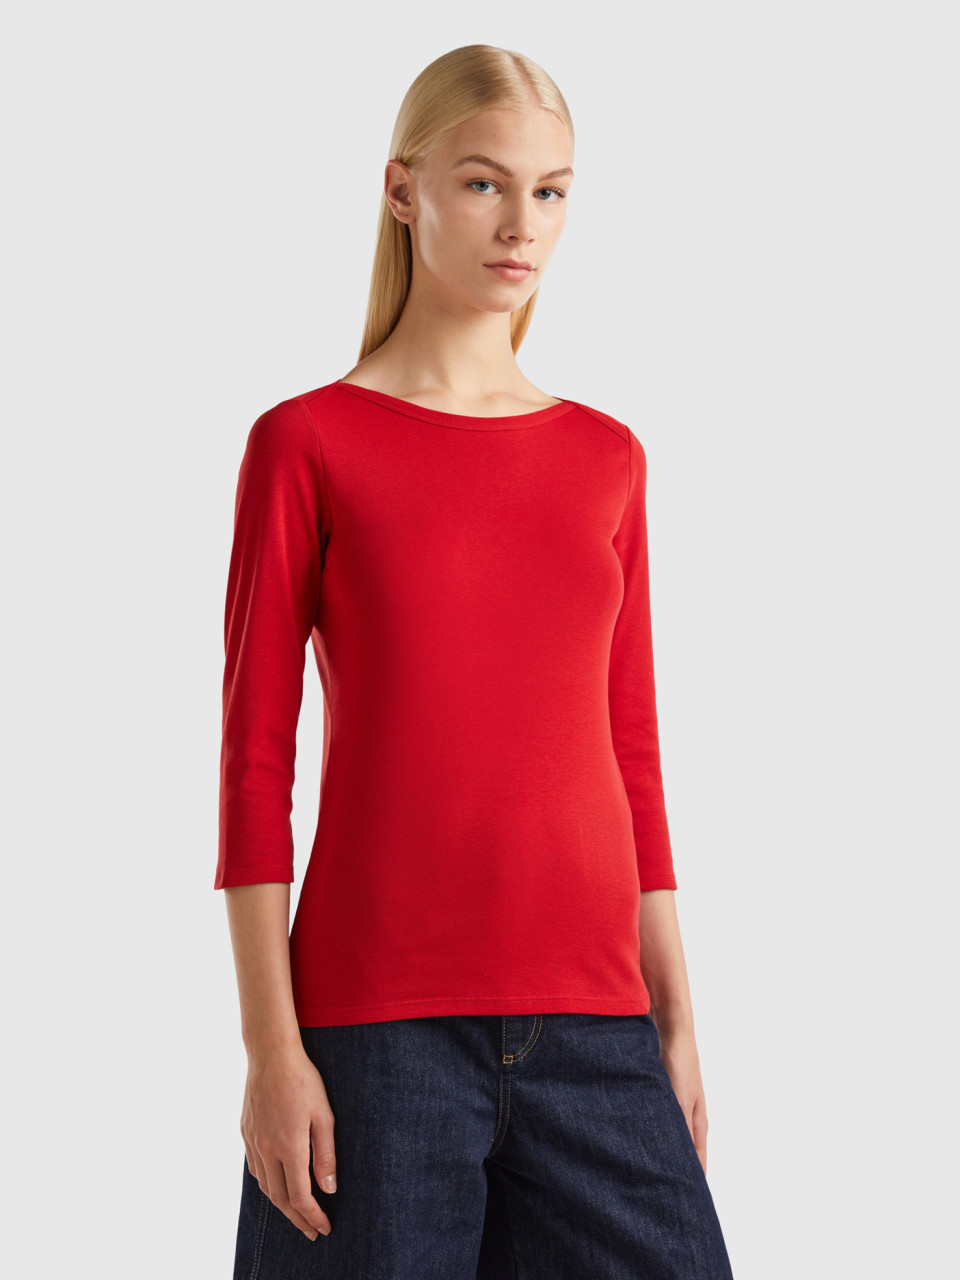 Benetton, T-shirt With Boat Neck In 100% Cotton, Red, Women